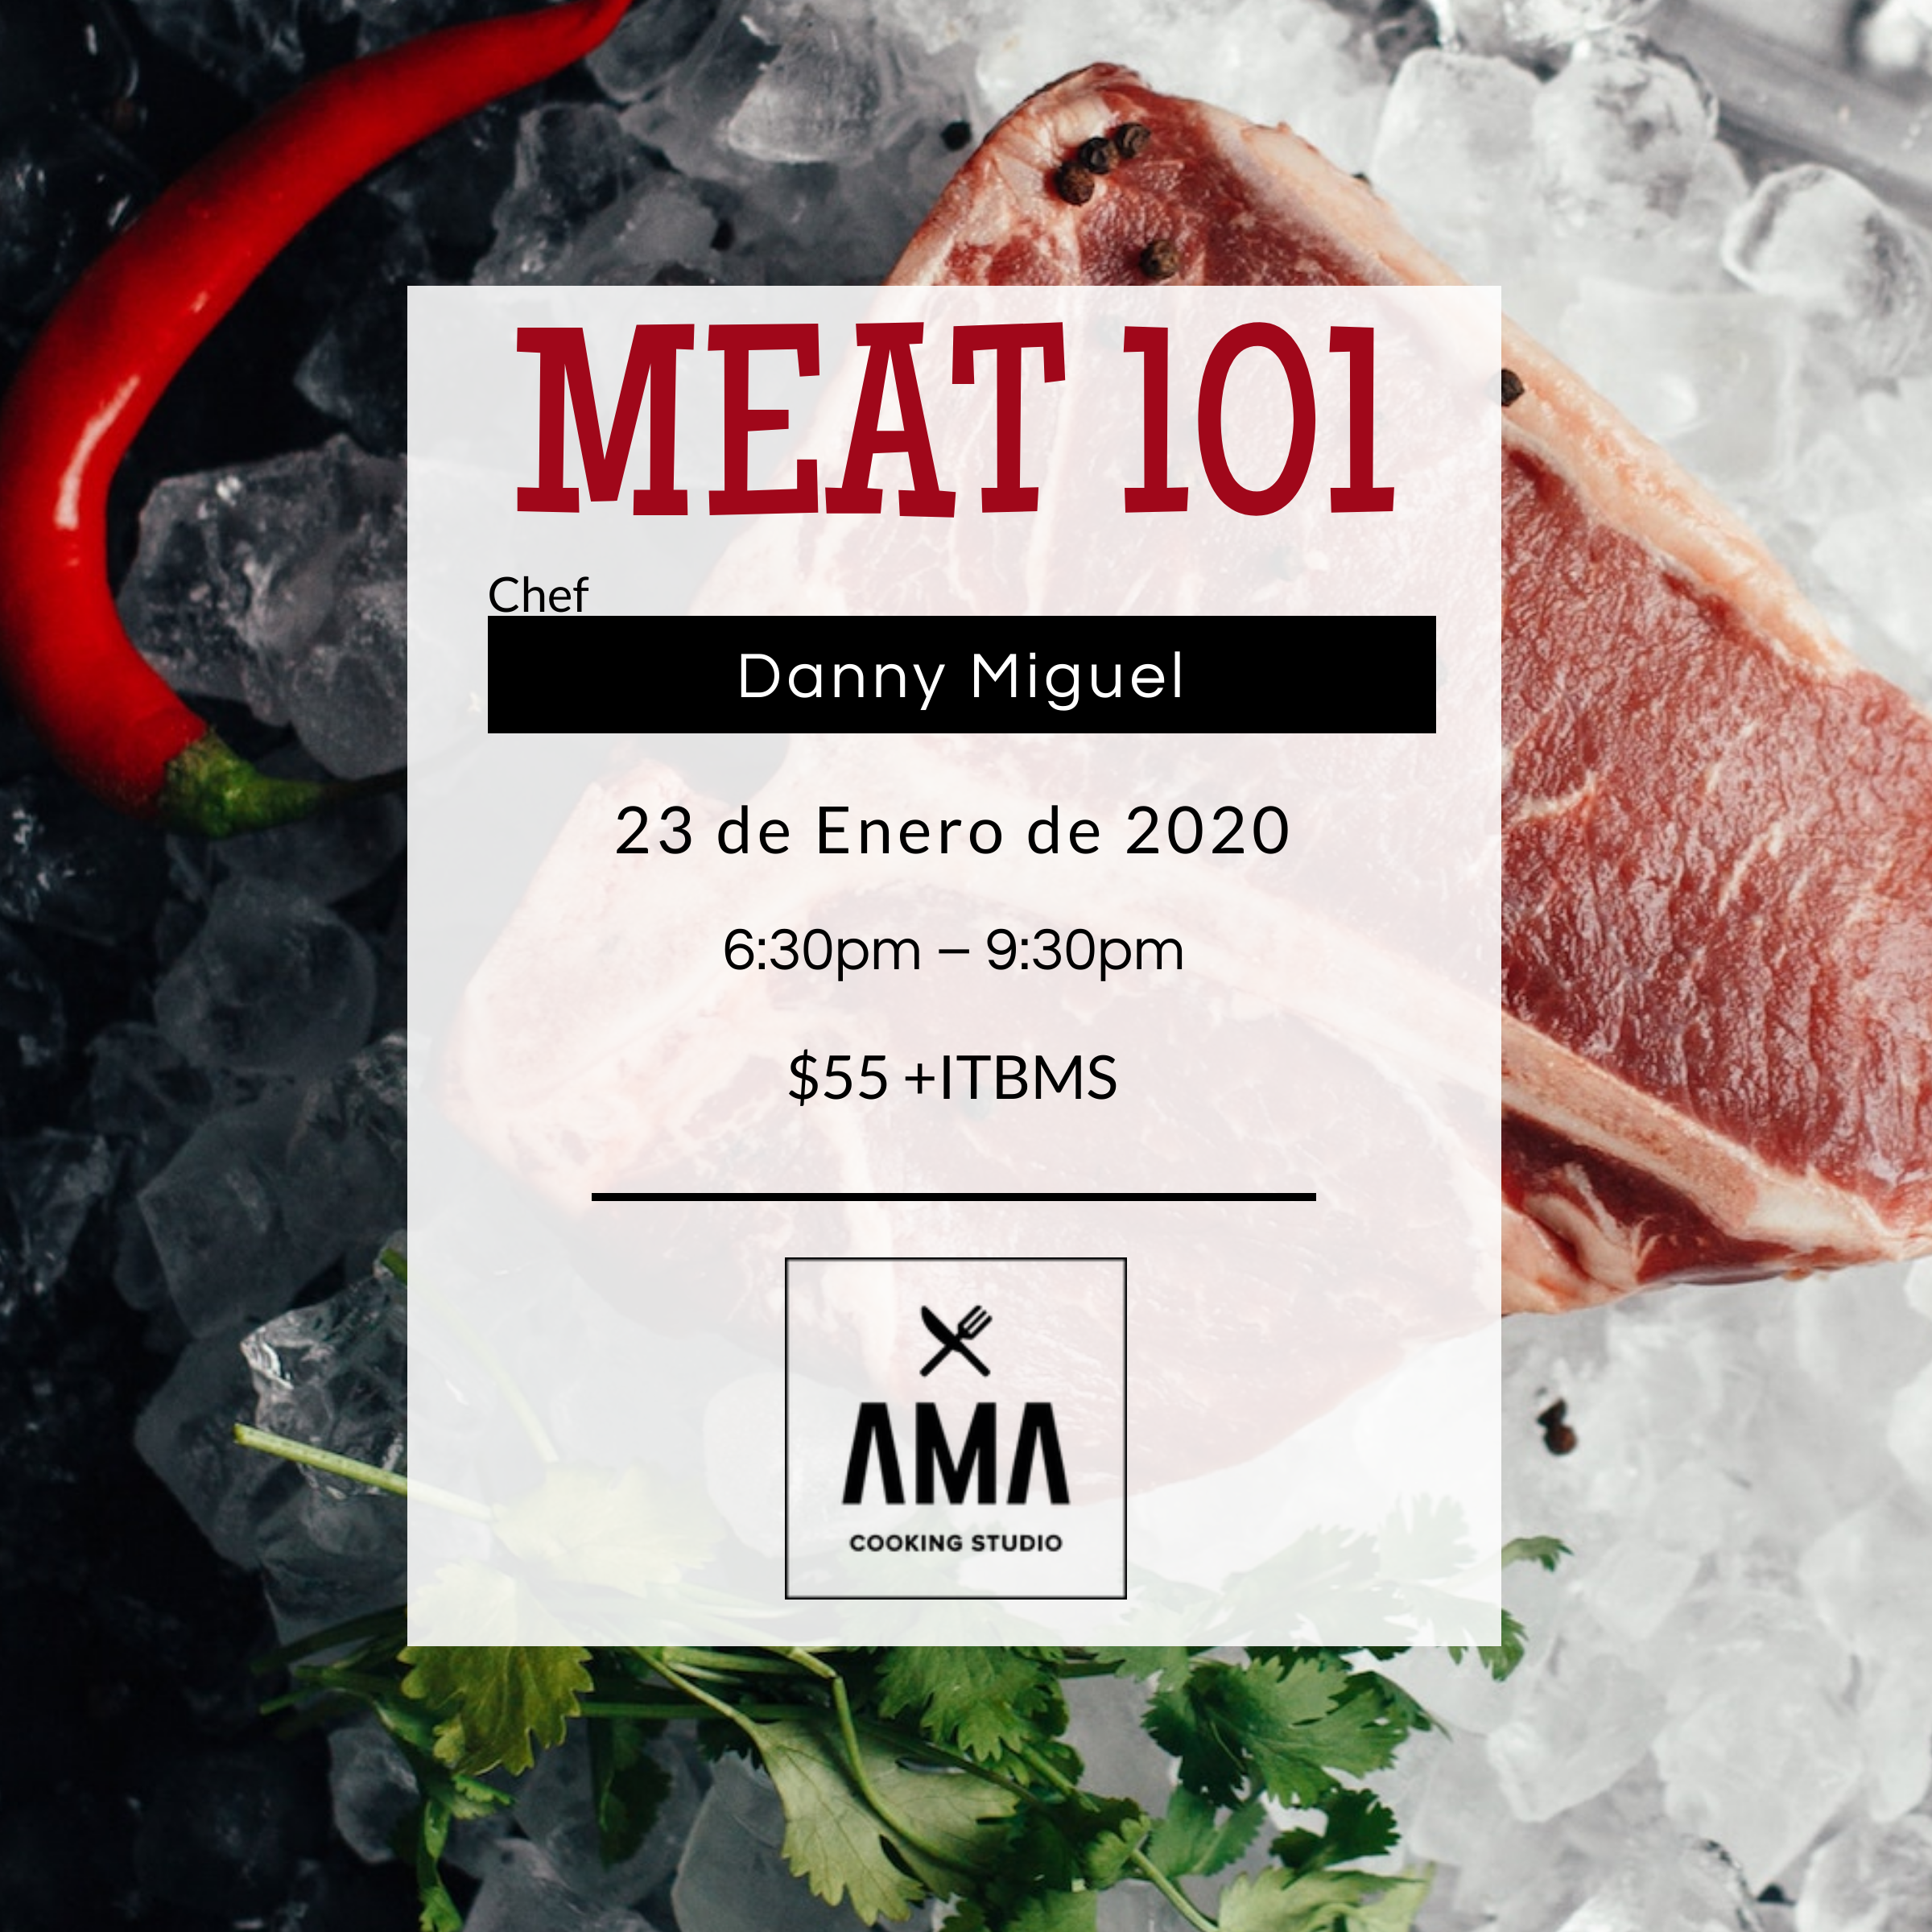 Meat 101